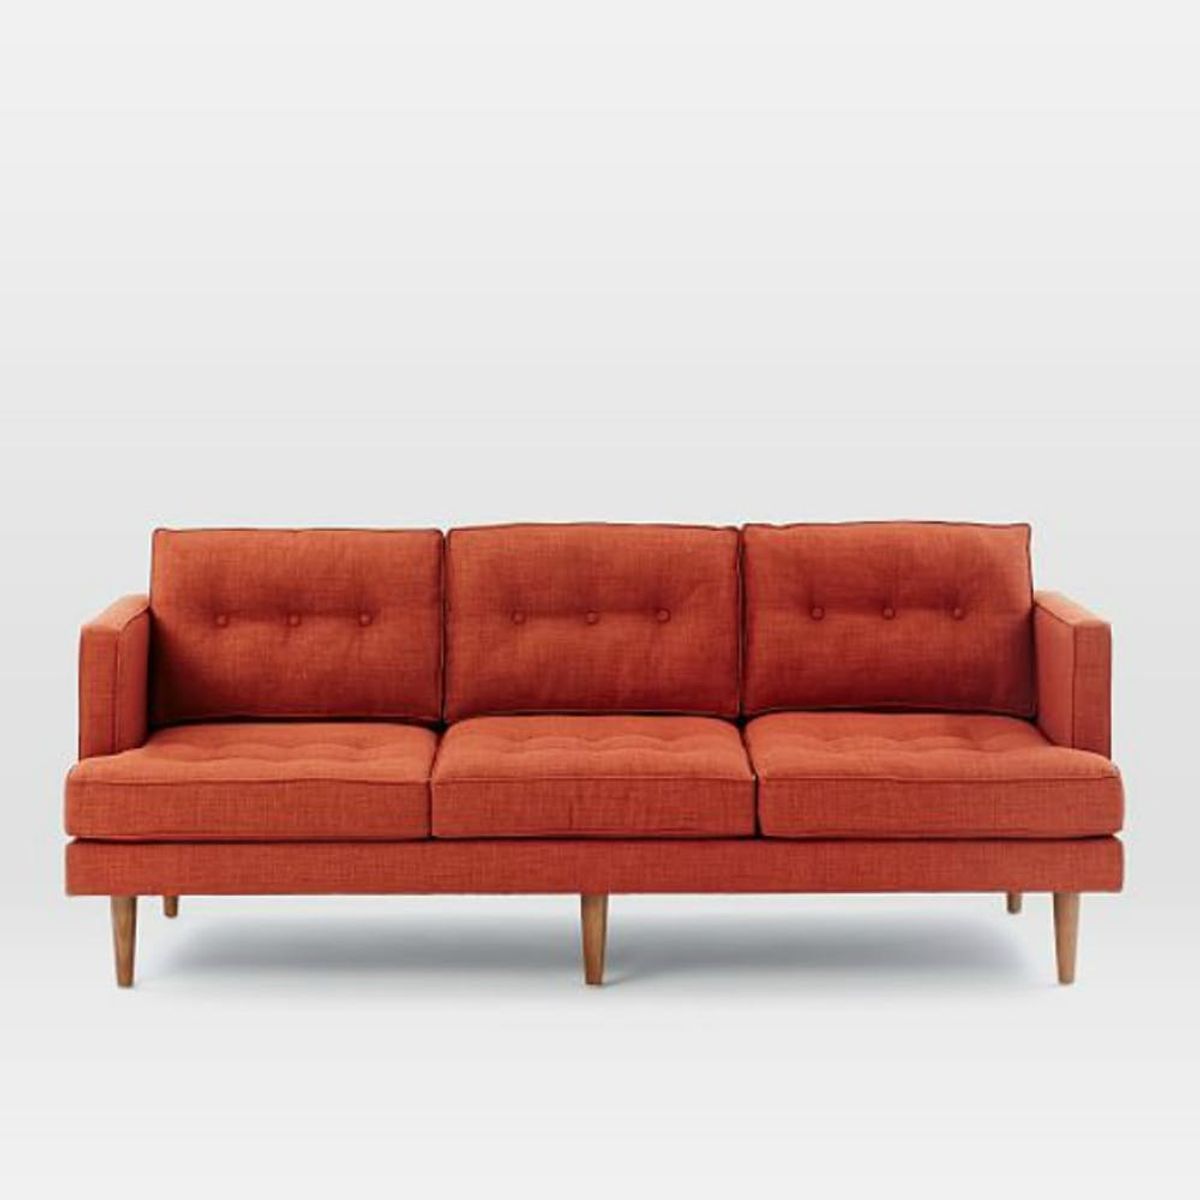 West Elm Is Offering Free Couches/Refunds to Anyone Who Bought the Peggy Couch